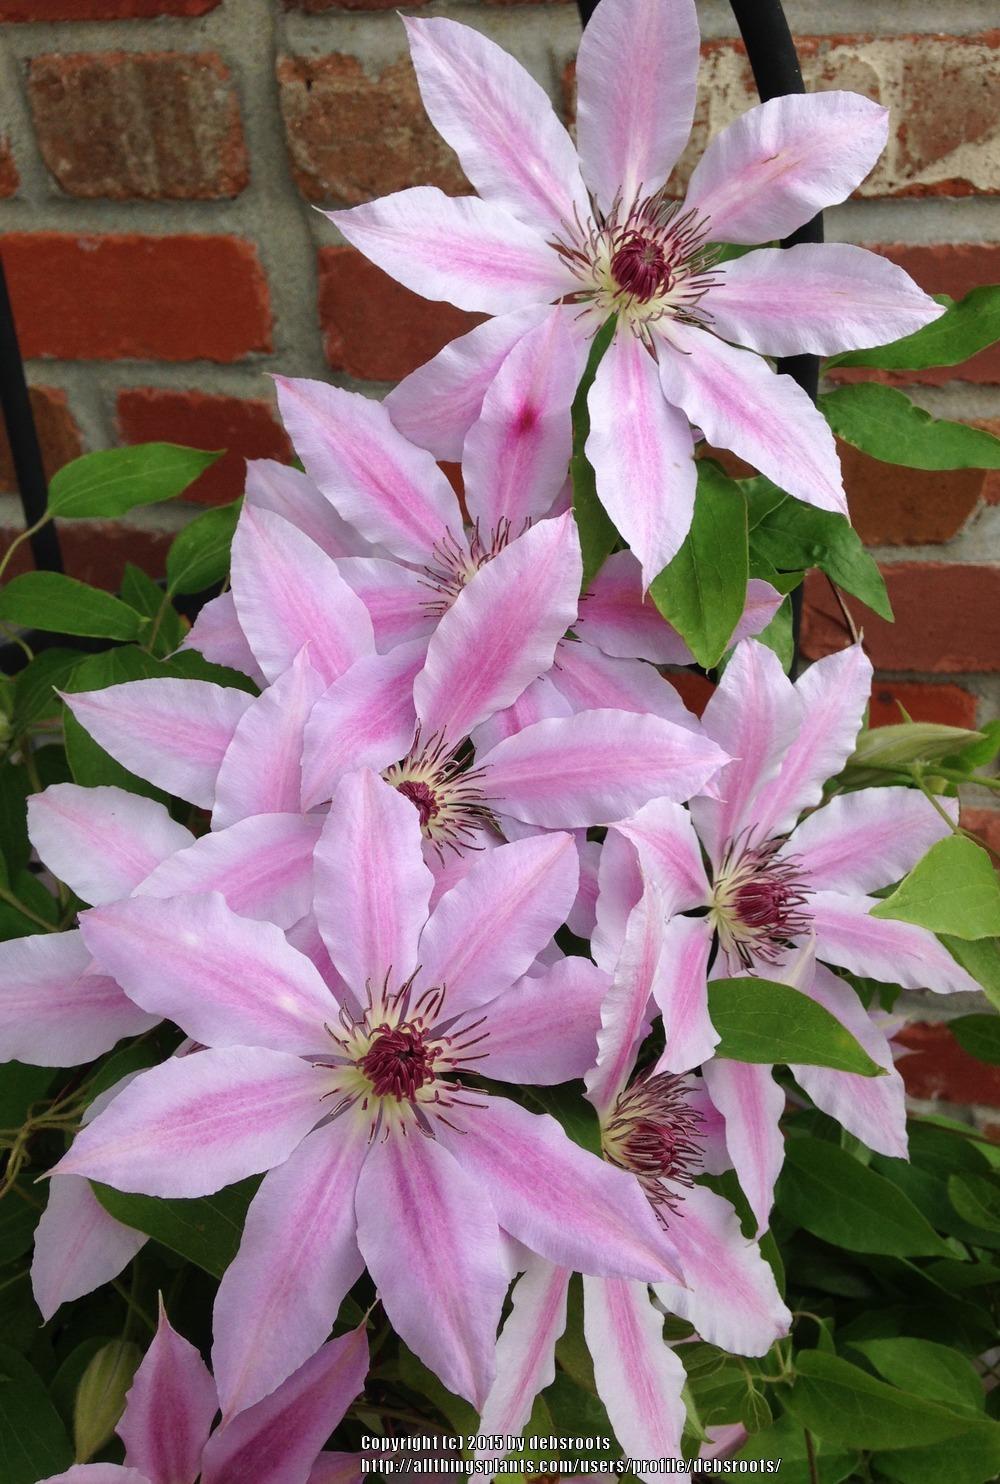 Photo of Clematis 'Nelly Moser' uploaded by debsroots